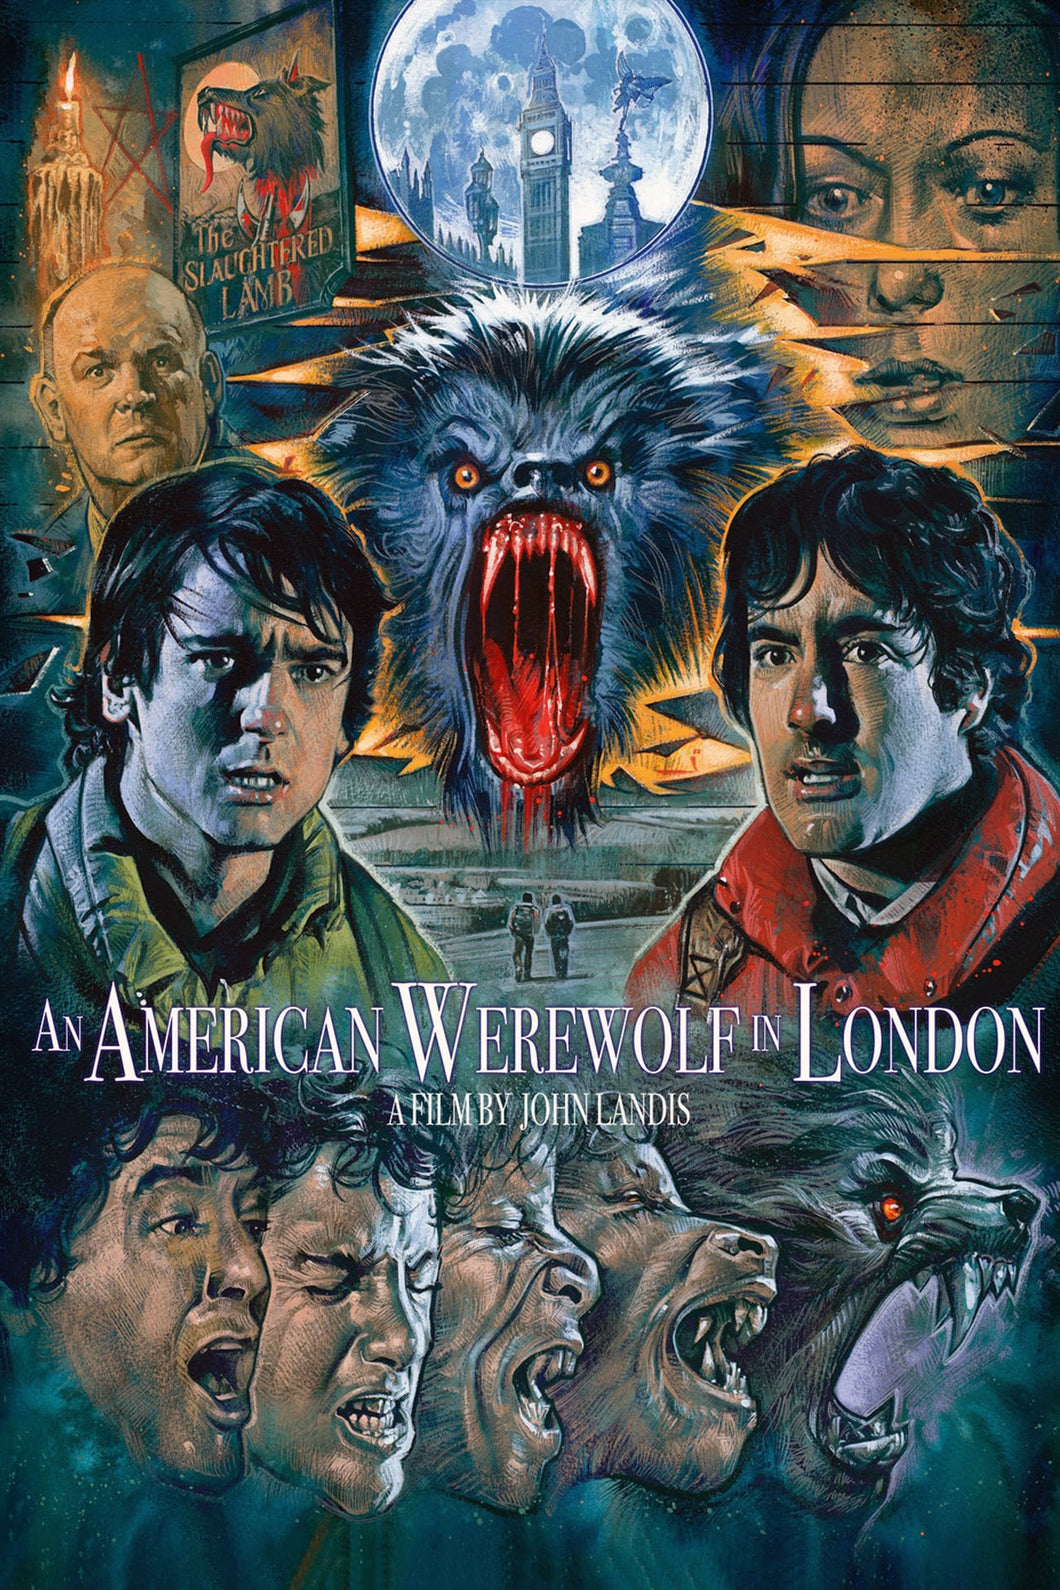 An American Werewolf In London (1981) Movie Poster Framed or Unframed Glossy Poster Free UK Shipping!!!